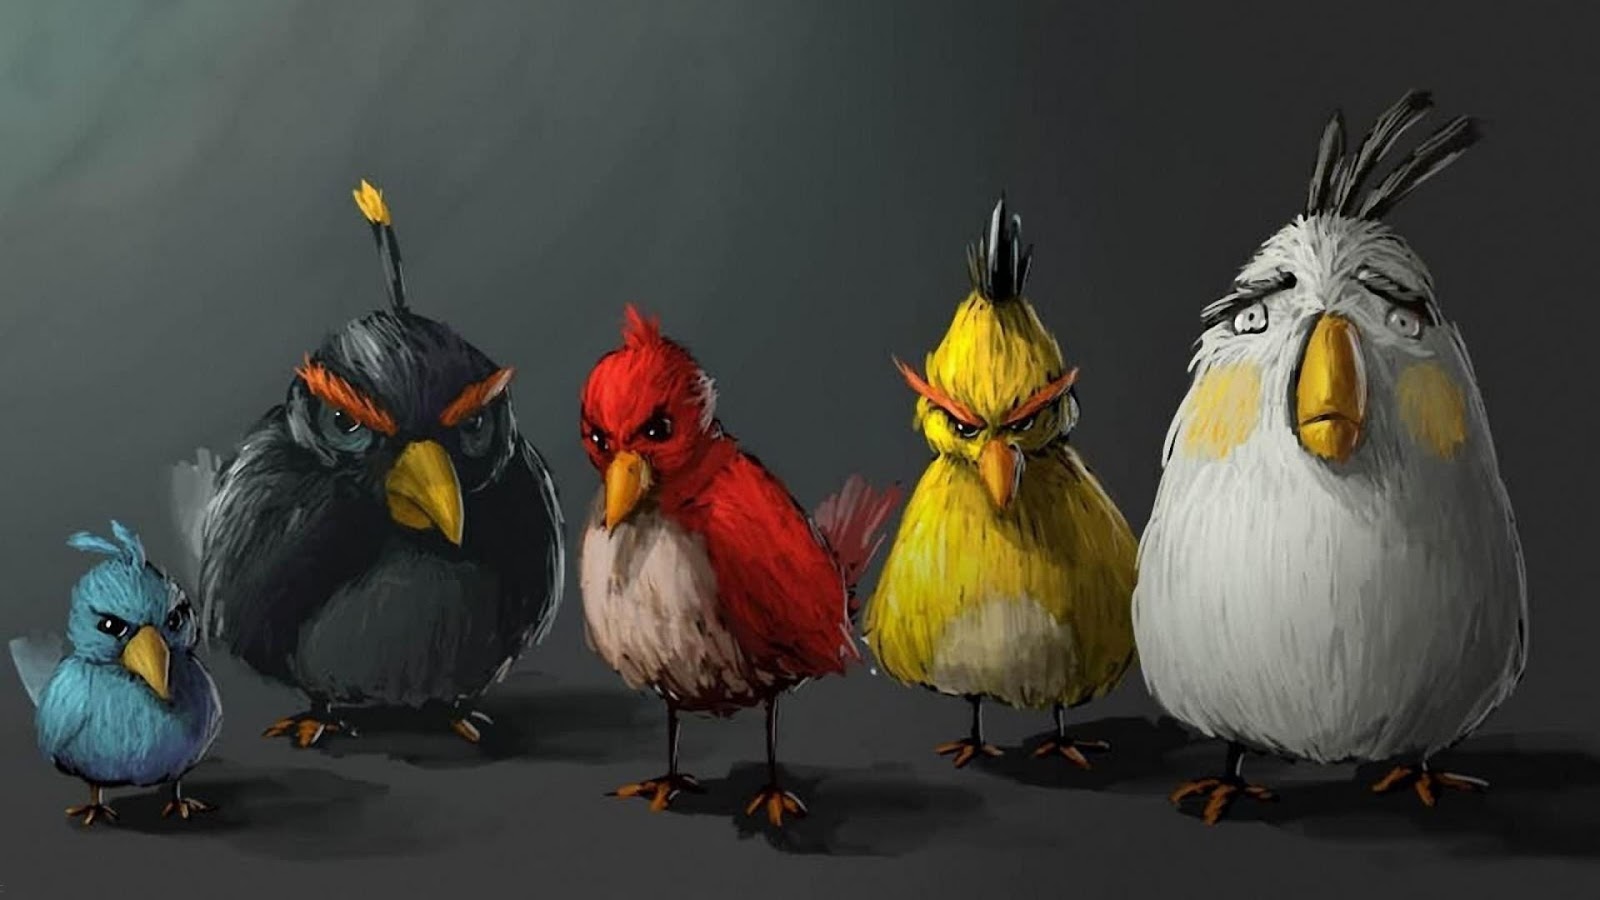 Angry Birds HD Wallpaper 2013